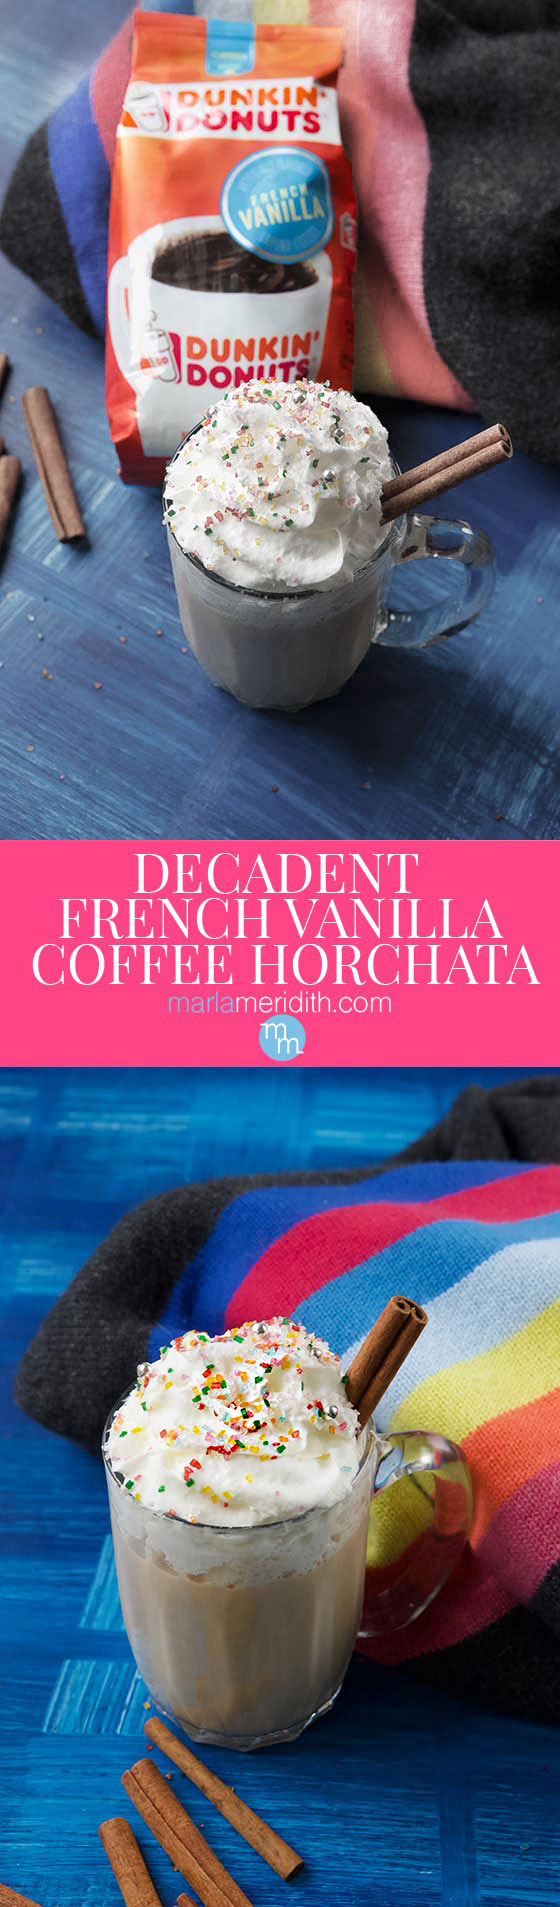 Share this delicious Decadent French Vanilla Coffee Horchata recipe over the holidays with friends and family! MarlaMeridith.com @walmart #ad #DunkinYouBrewYou